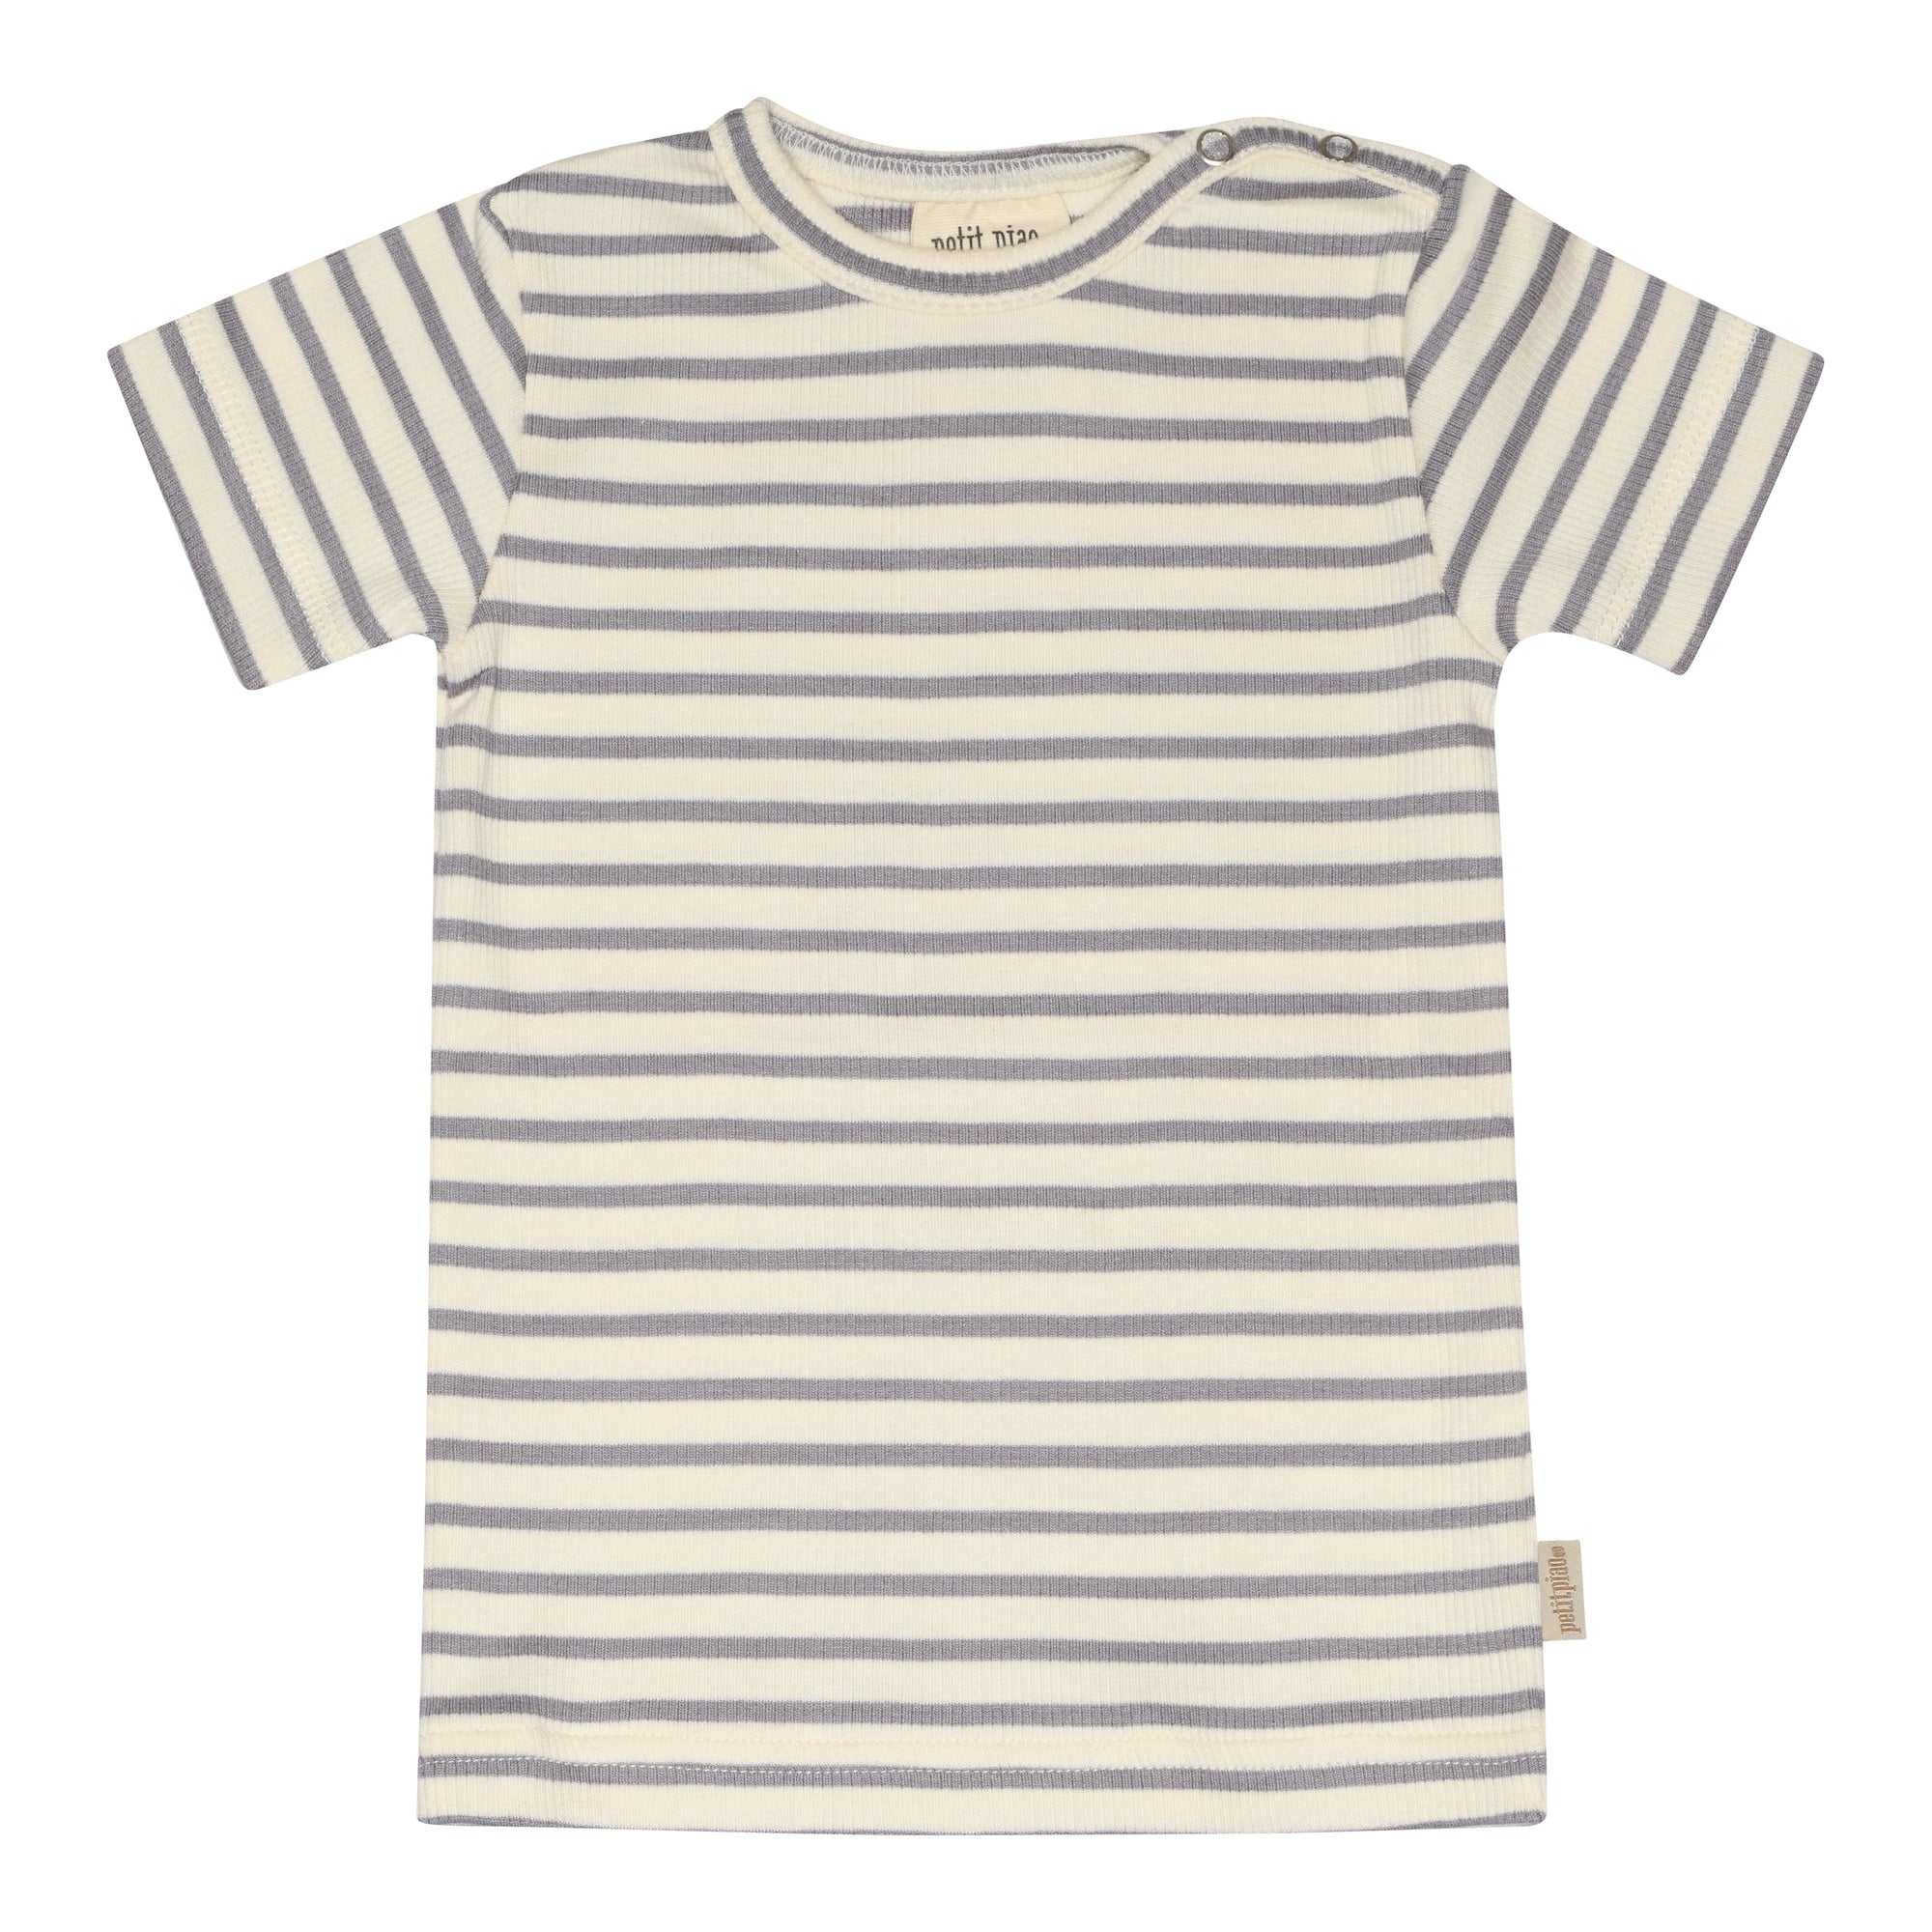 Petit Piao - T-shirt SS Modal Striped, PP305 - Dusty Lavender / Offwhite